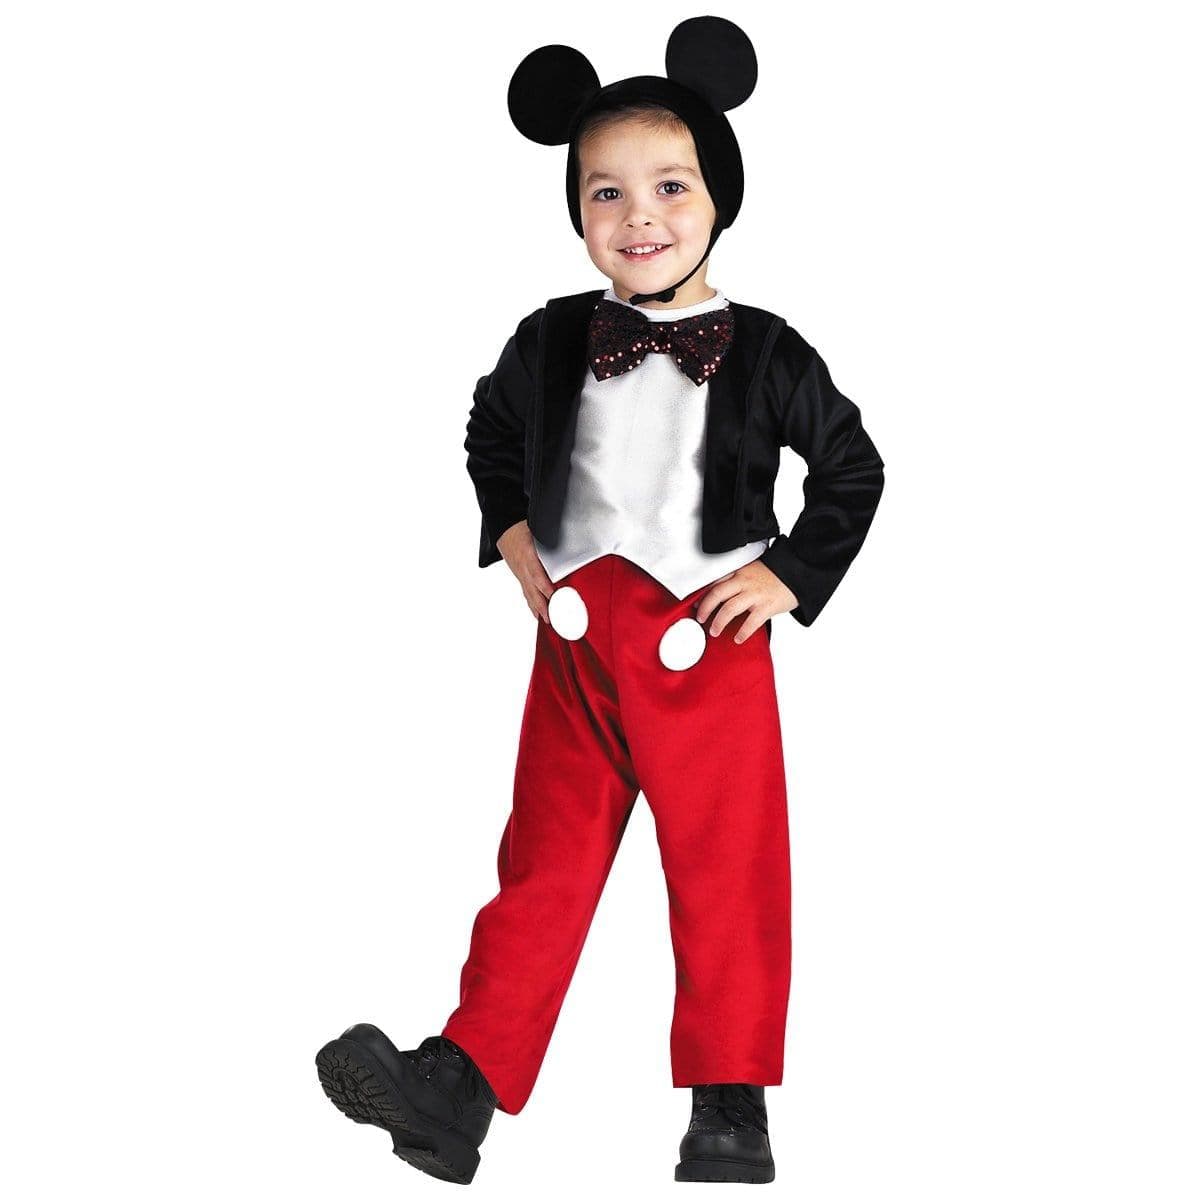 Buy Costumes Mickey Mouse Deluxe Costume for Toddler, Disney sold at Party Expert